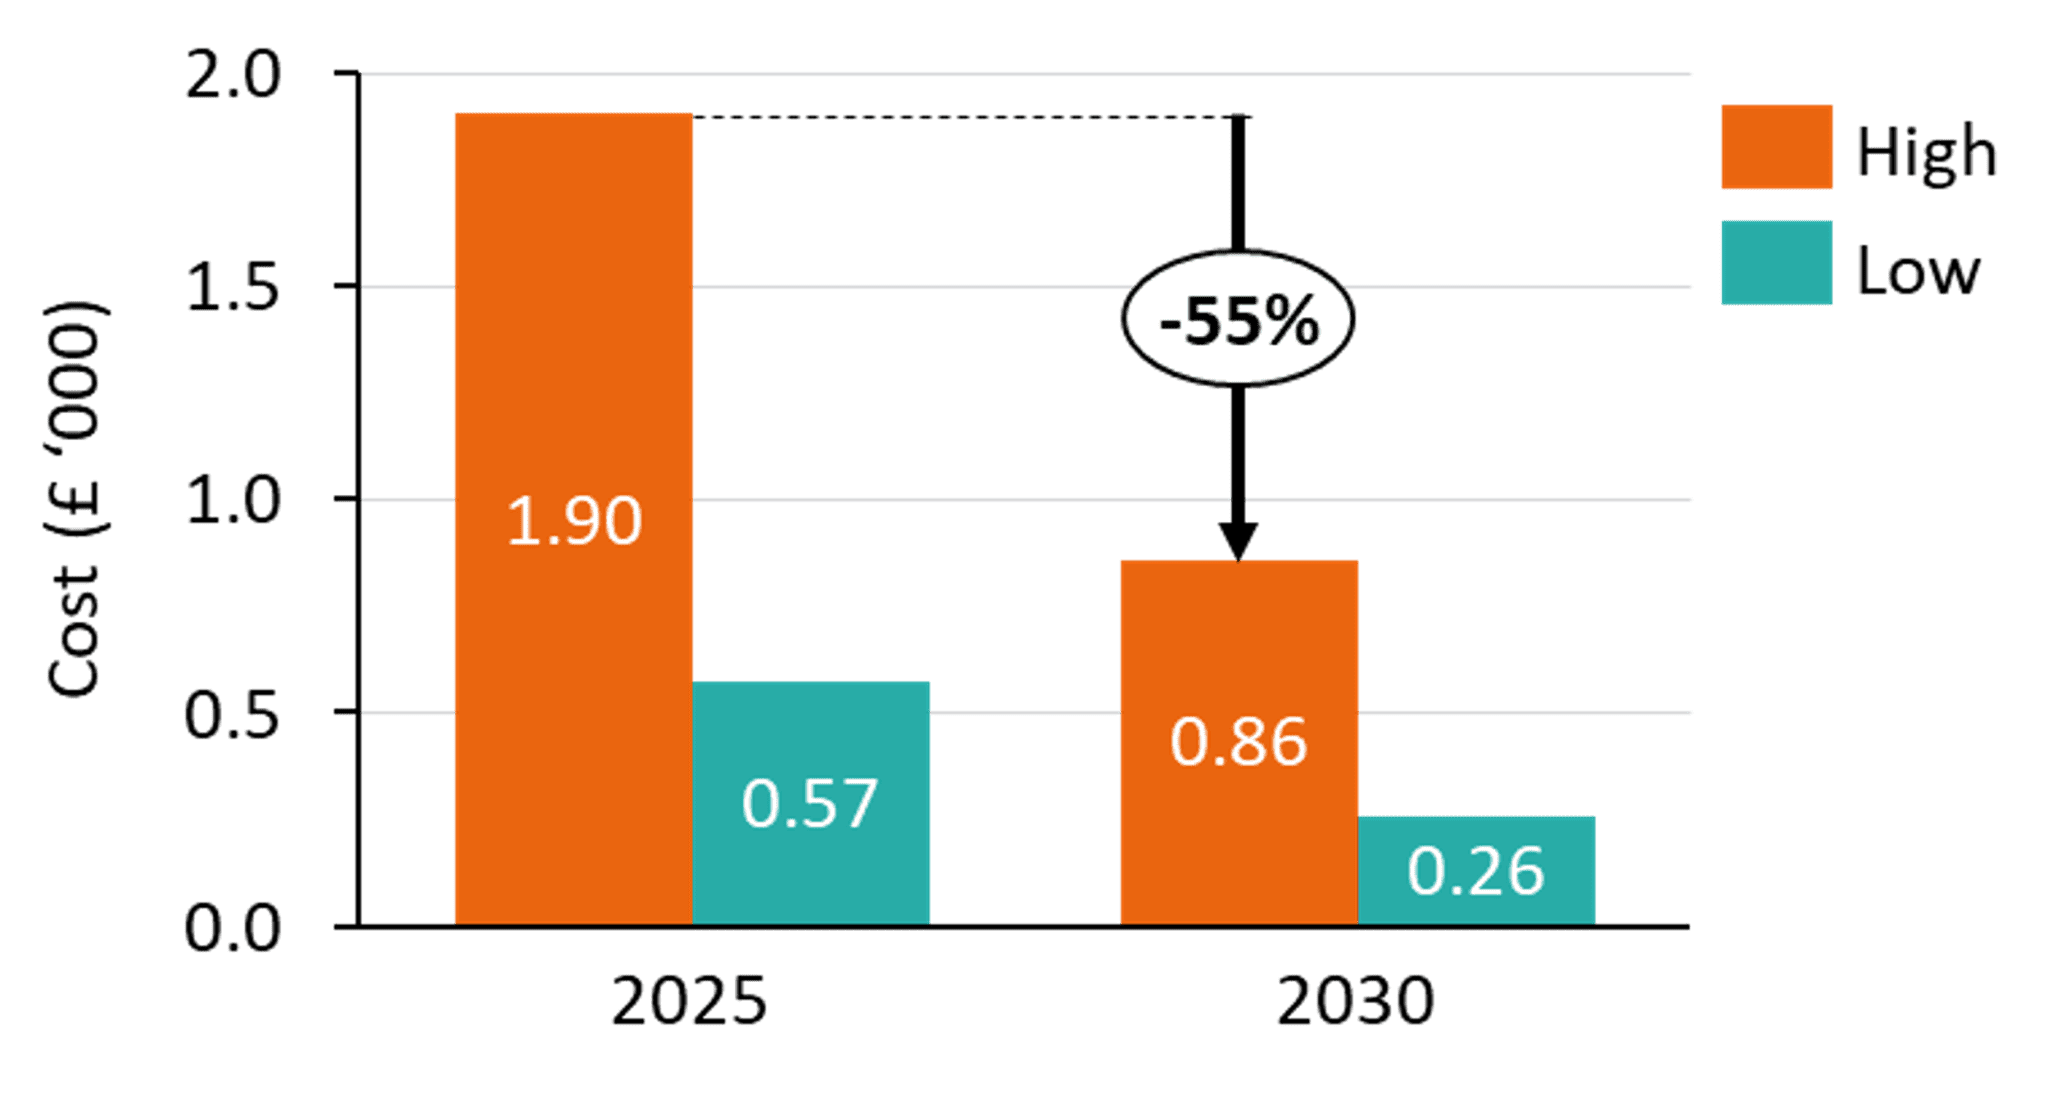 A chart showing the associated costs for hardware and installations for a 7 kW AC charger in 2025 and 2030, respectively. The costs are given in terms the thousands of pounds. In 2025, the high cost is £1,900 and the low cost is £570. In 2030, the high cost is £860 and the low cost is £260. 